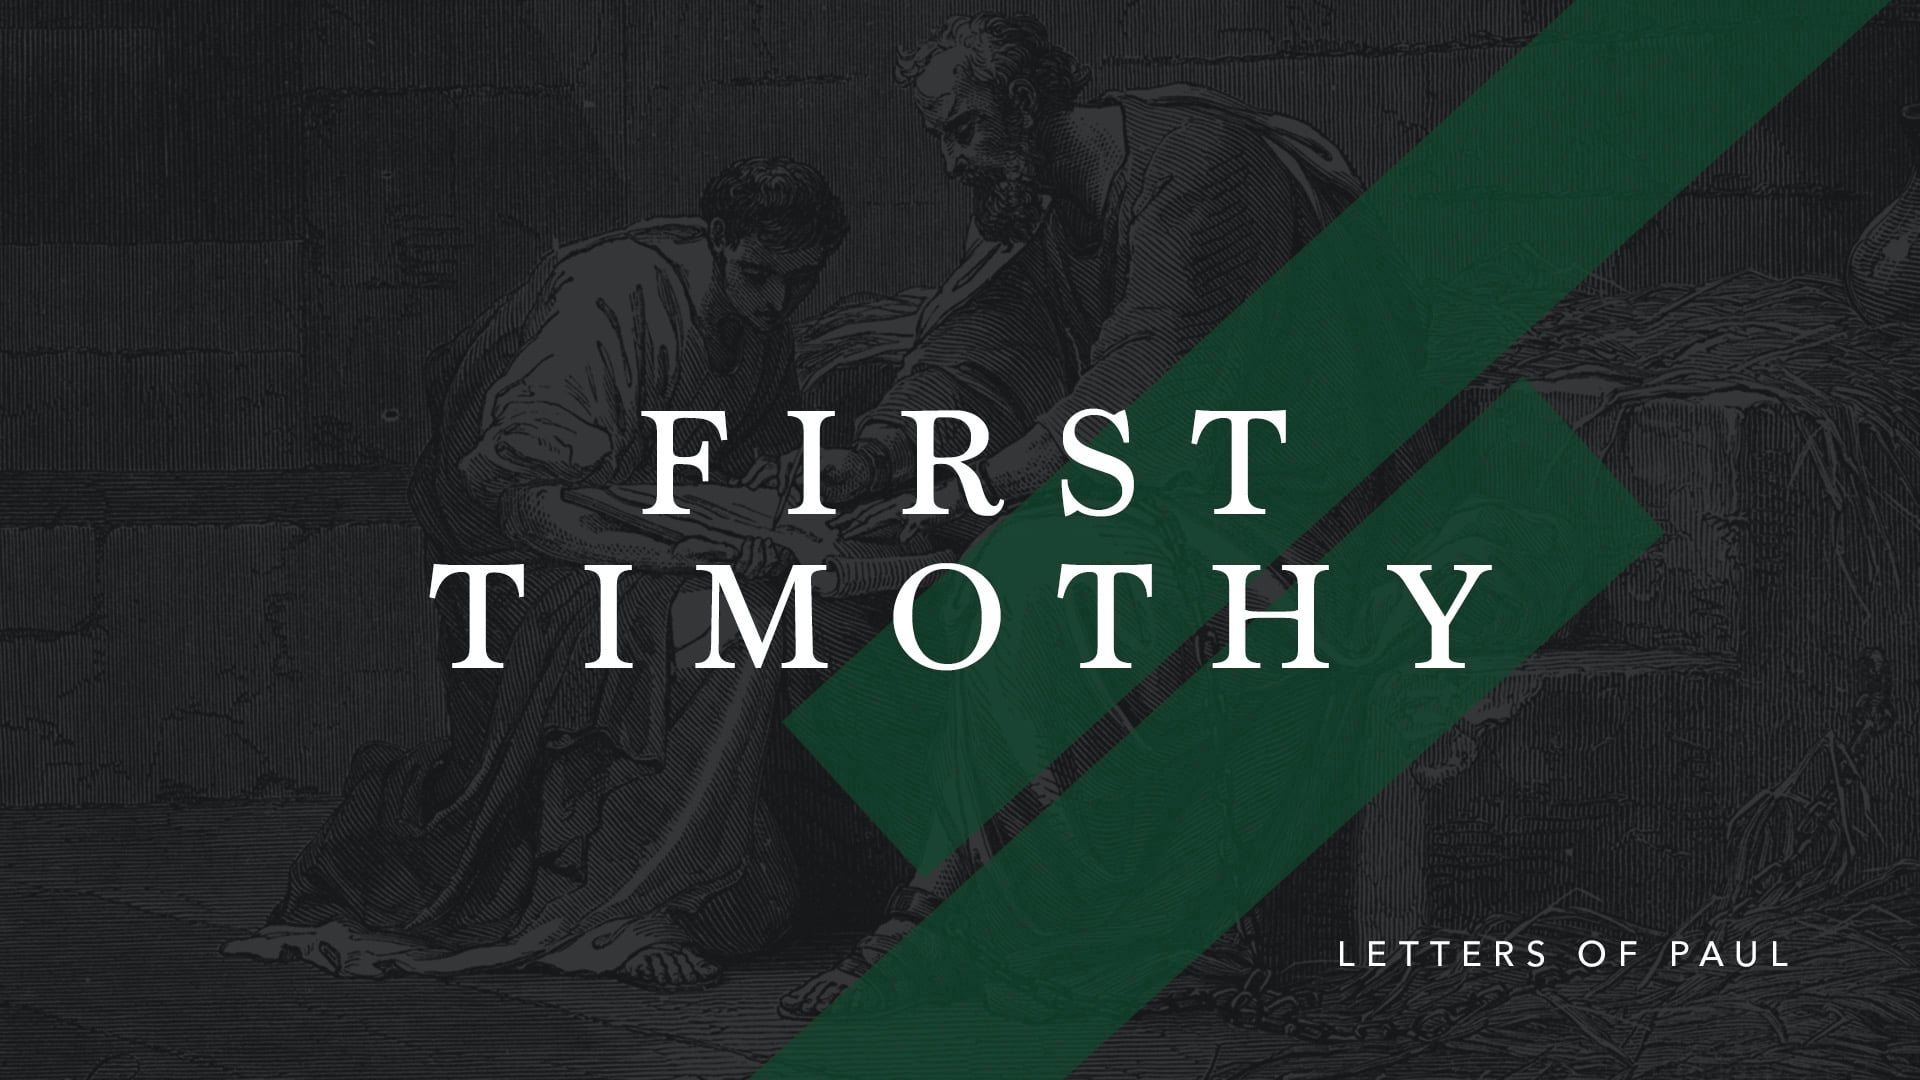 First Timothy: Caring For Those in Need